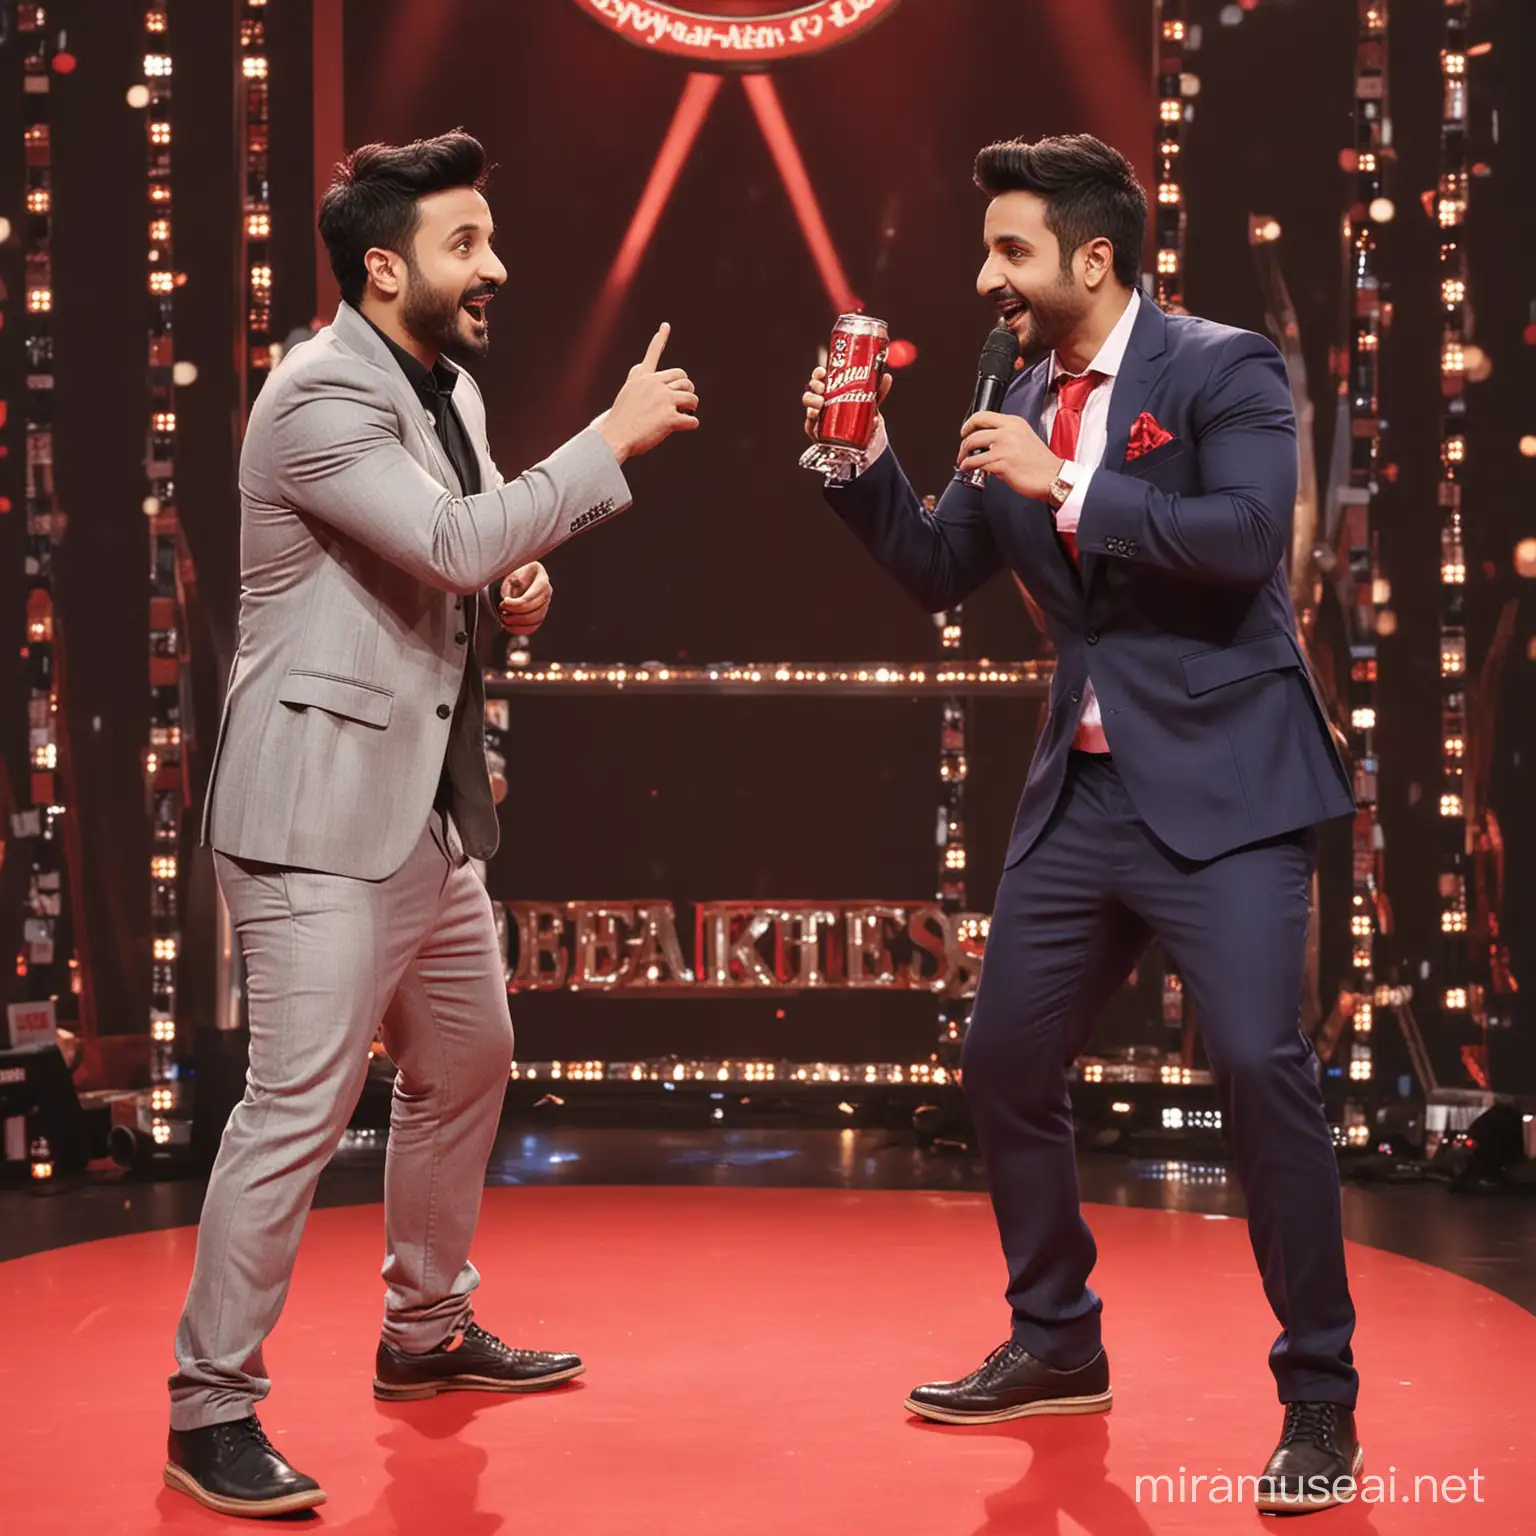 Comedian Vir Das playing a talkshow host with actor Vedang Raina who are engaged in a dance off segment of the show. The show is called 'Cheers To The Smooth Ones' whose logo should be at the top. Try and integrate Budweiser in as well